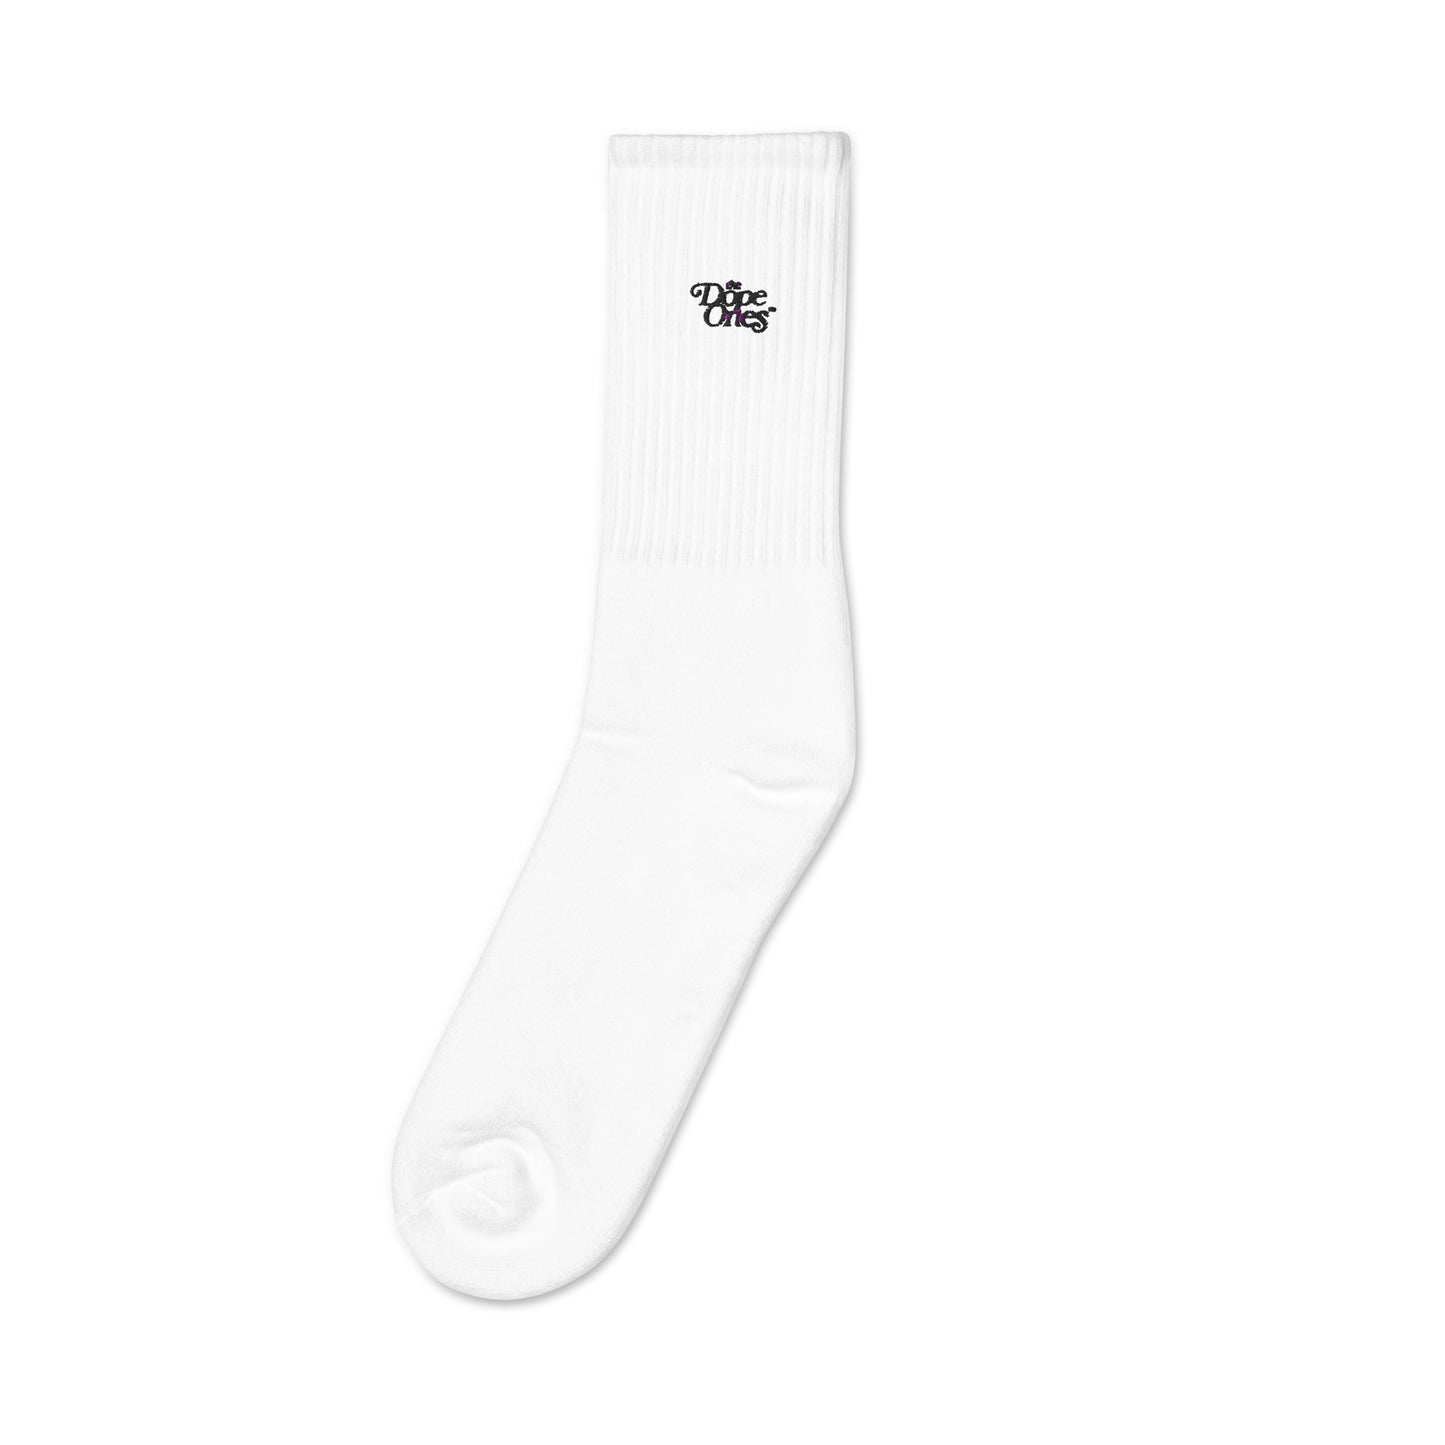 theDopeOnes Embroidered Socks